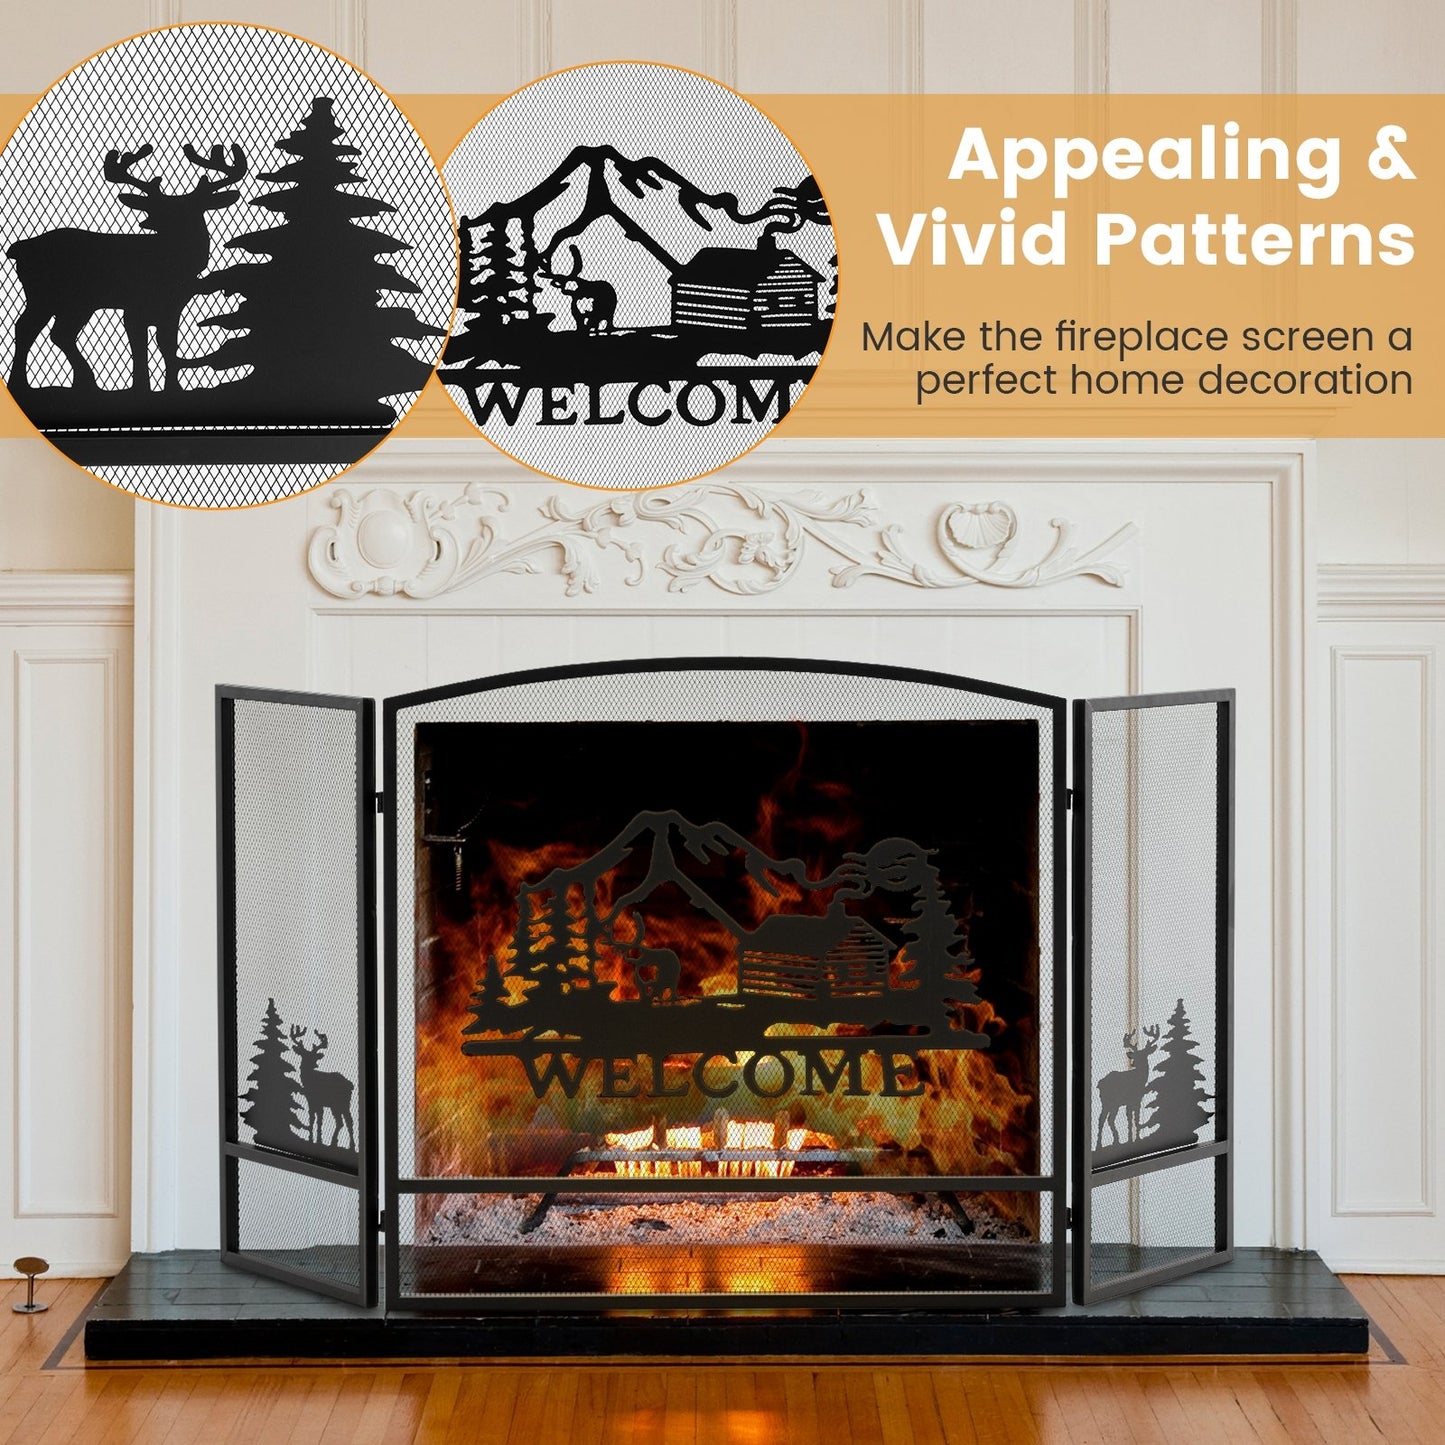 55 x 29.5 Inch Fireplace Screen with Natural Scenery and Moose Pattern, Black